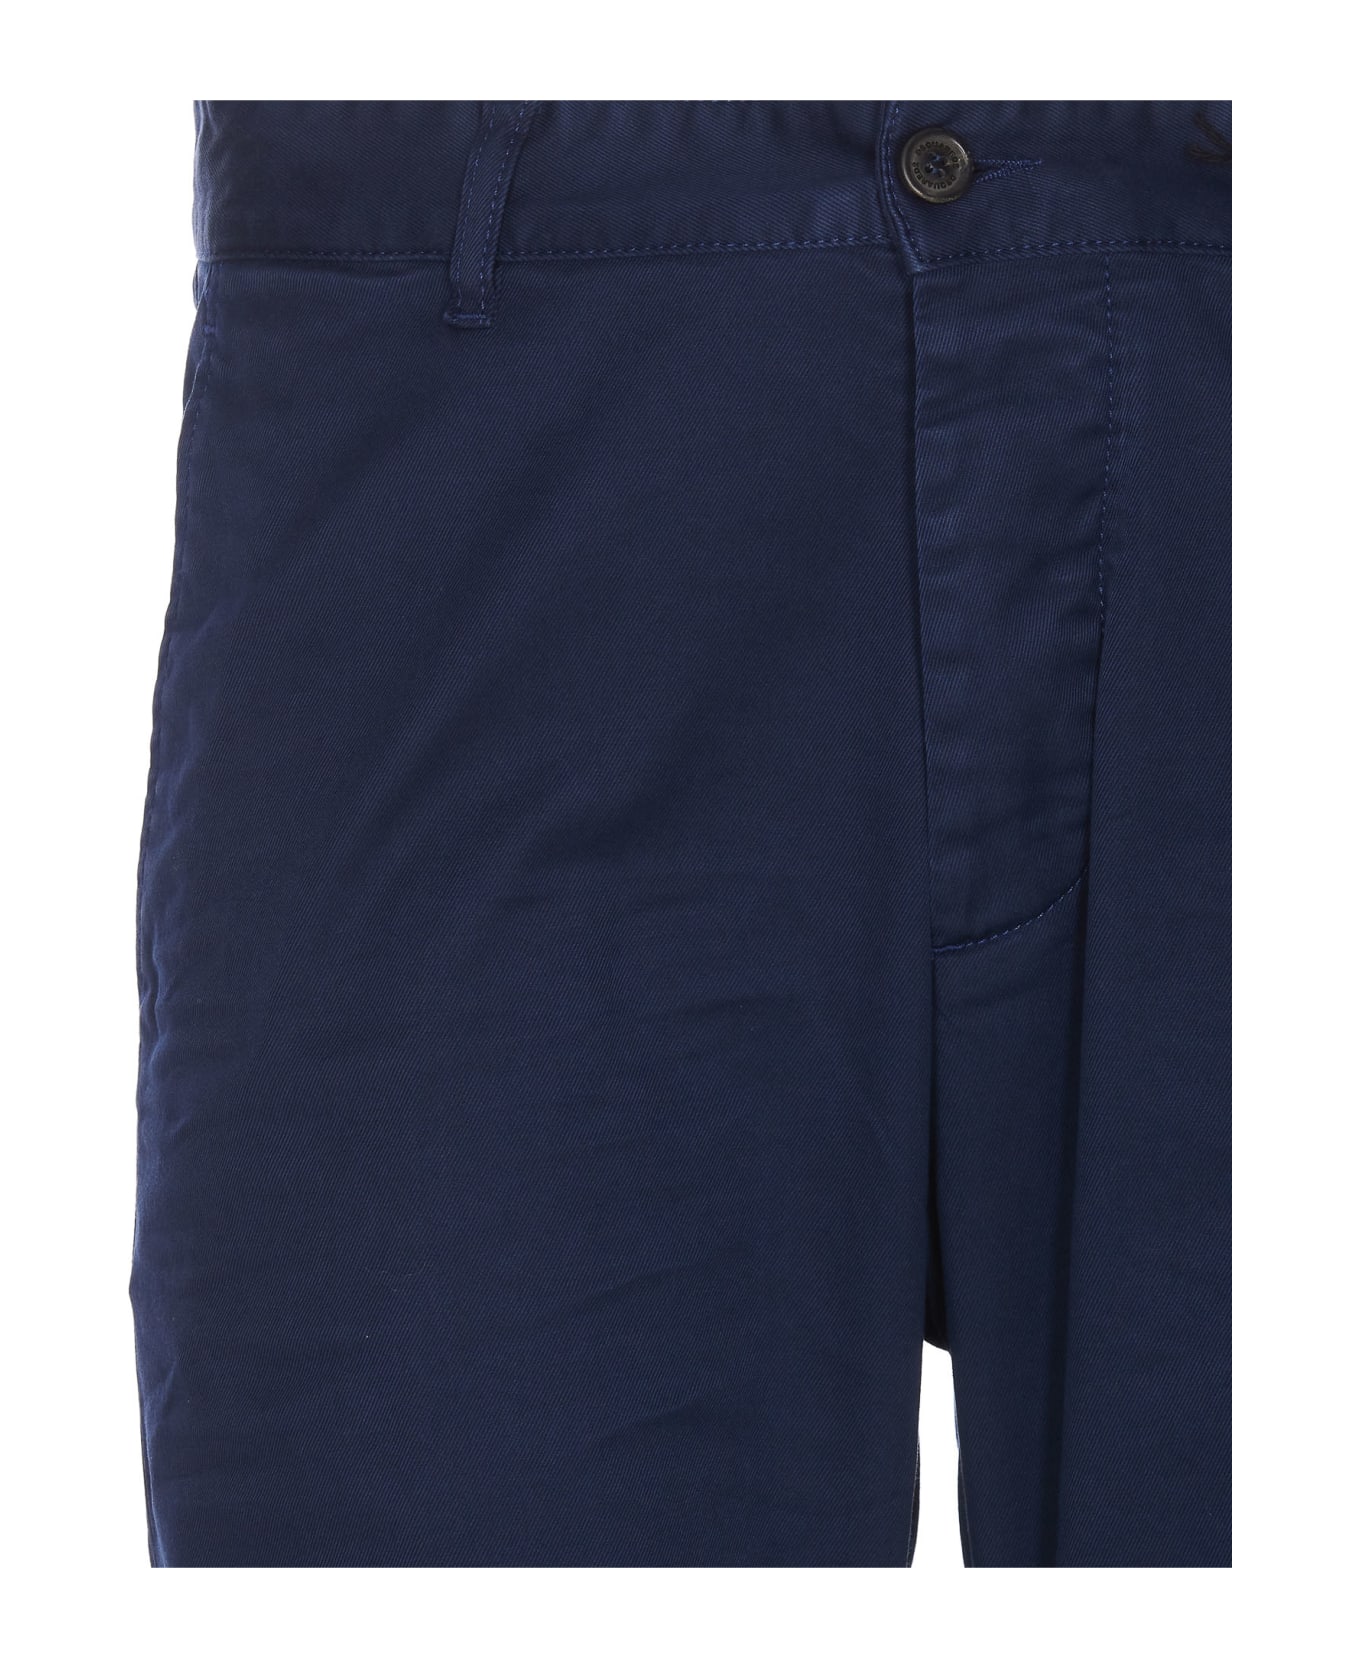 Dsquared2 Sexy Chino Pants - Navy Blue